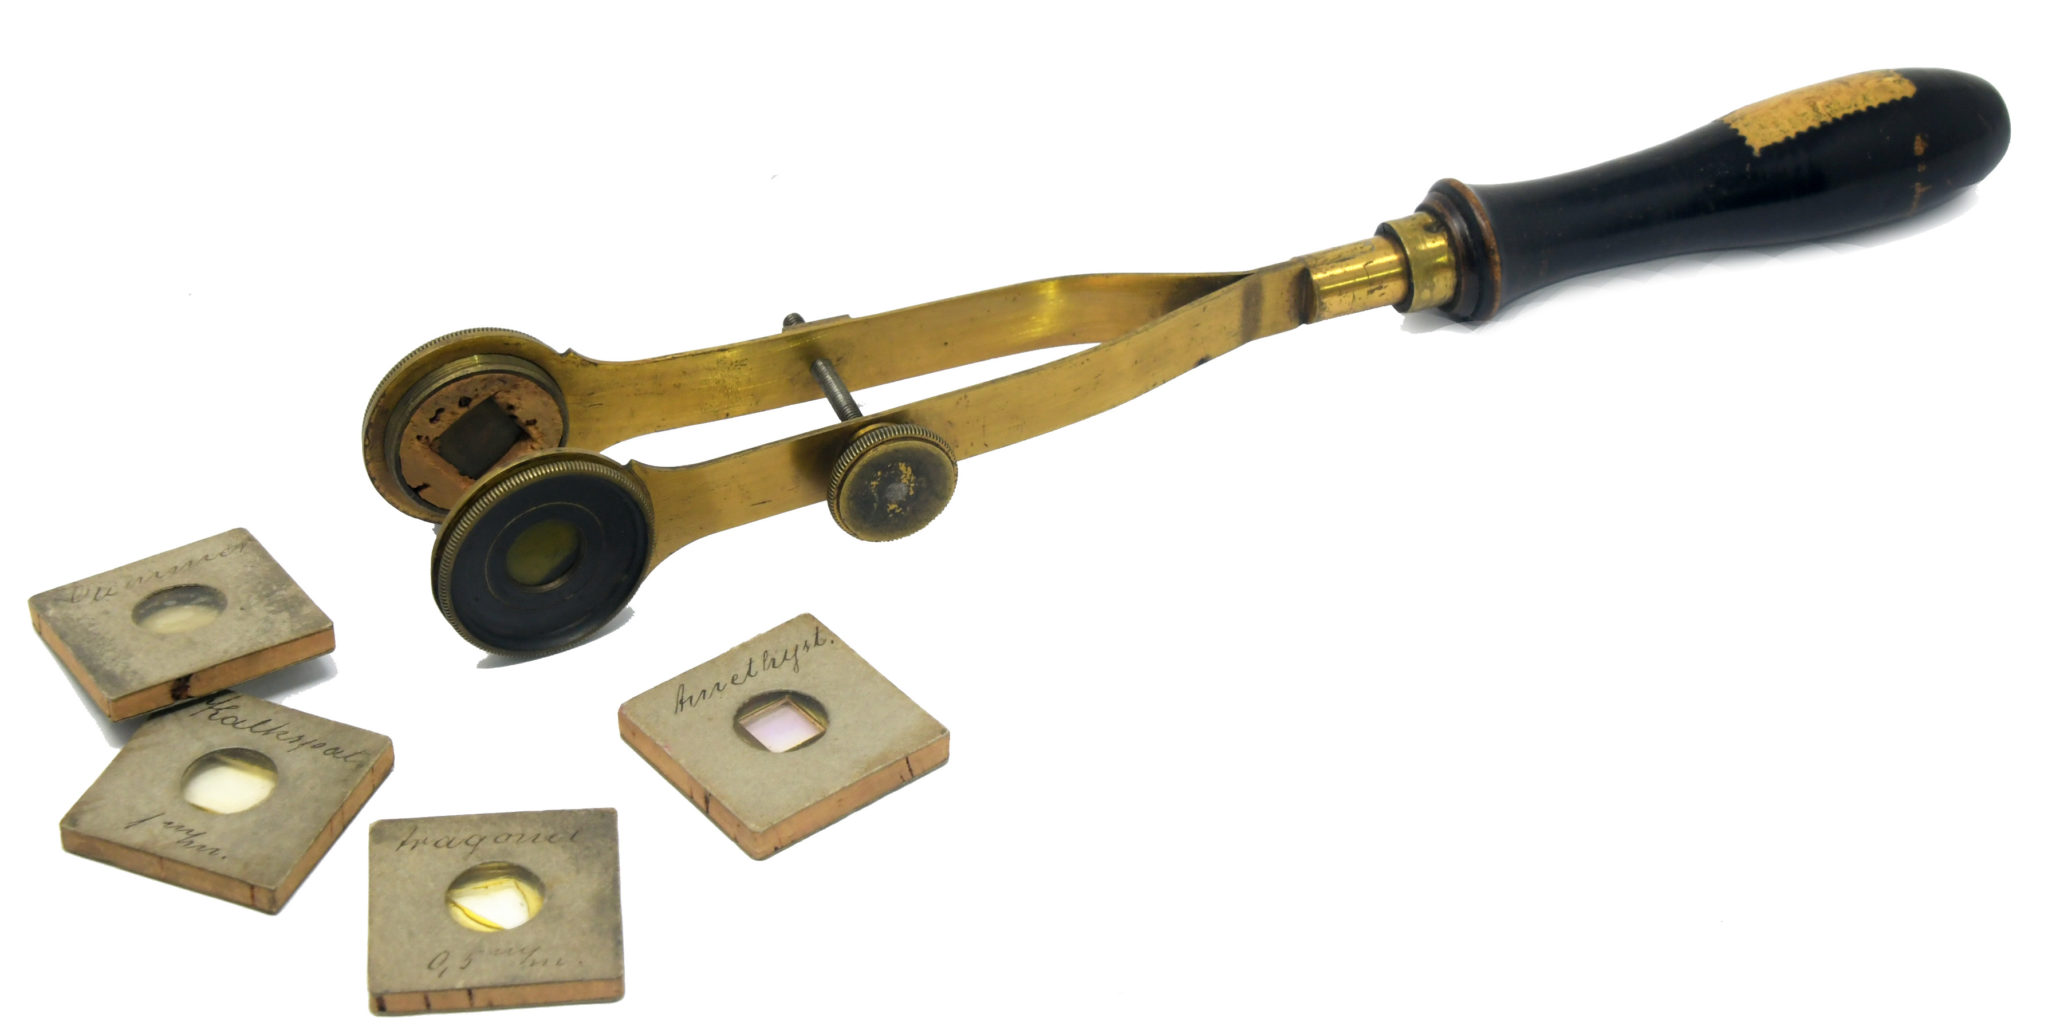 Early Tourmanile Tongs for the determination of crystal geometry in optical mineralogy, ca. 1860